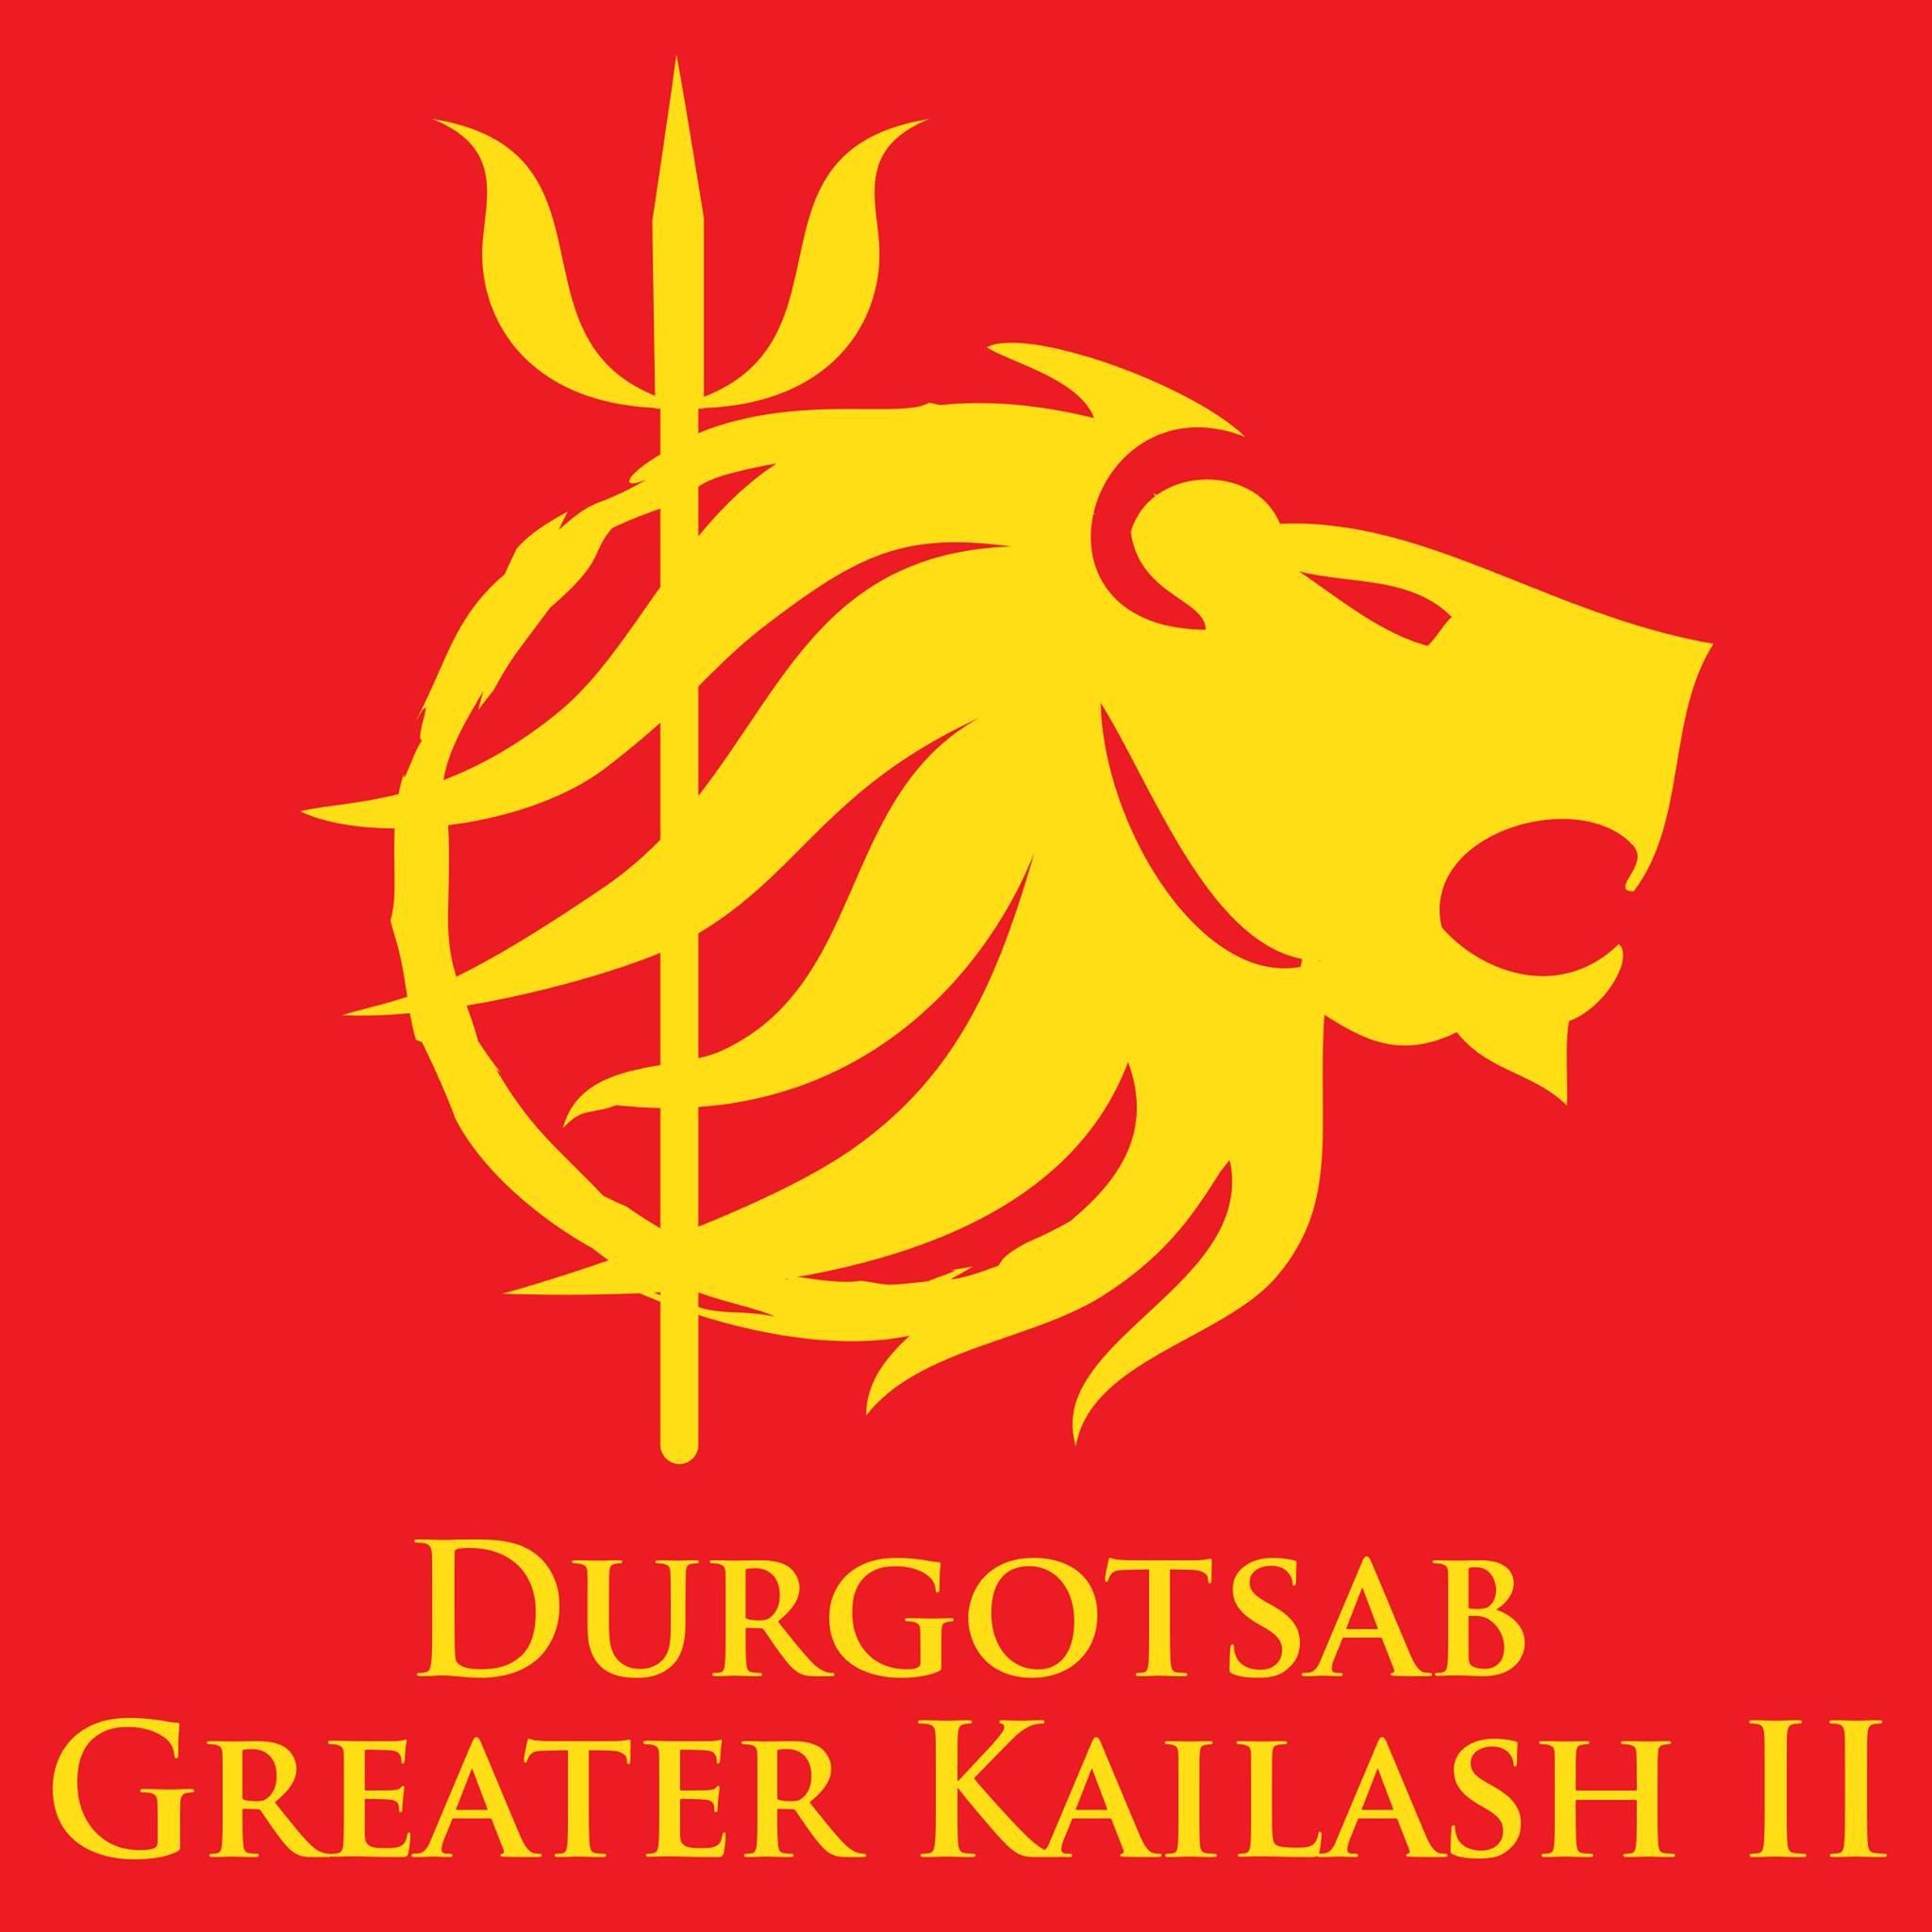 The GK 2 Durgotsab is a Puja celebration committee, organises a grand Durga Puja in Greater Kailash Part 2, New Delhi